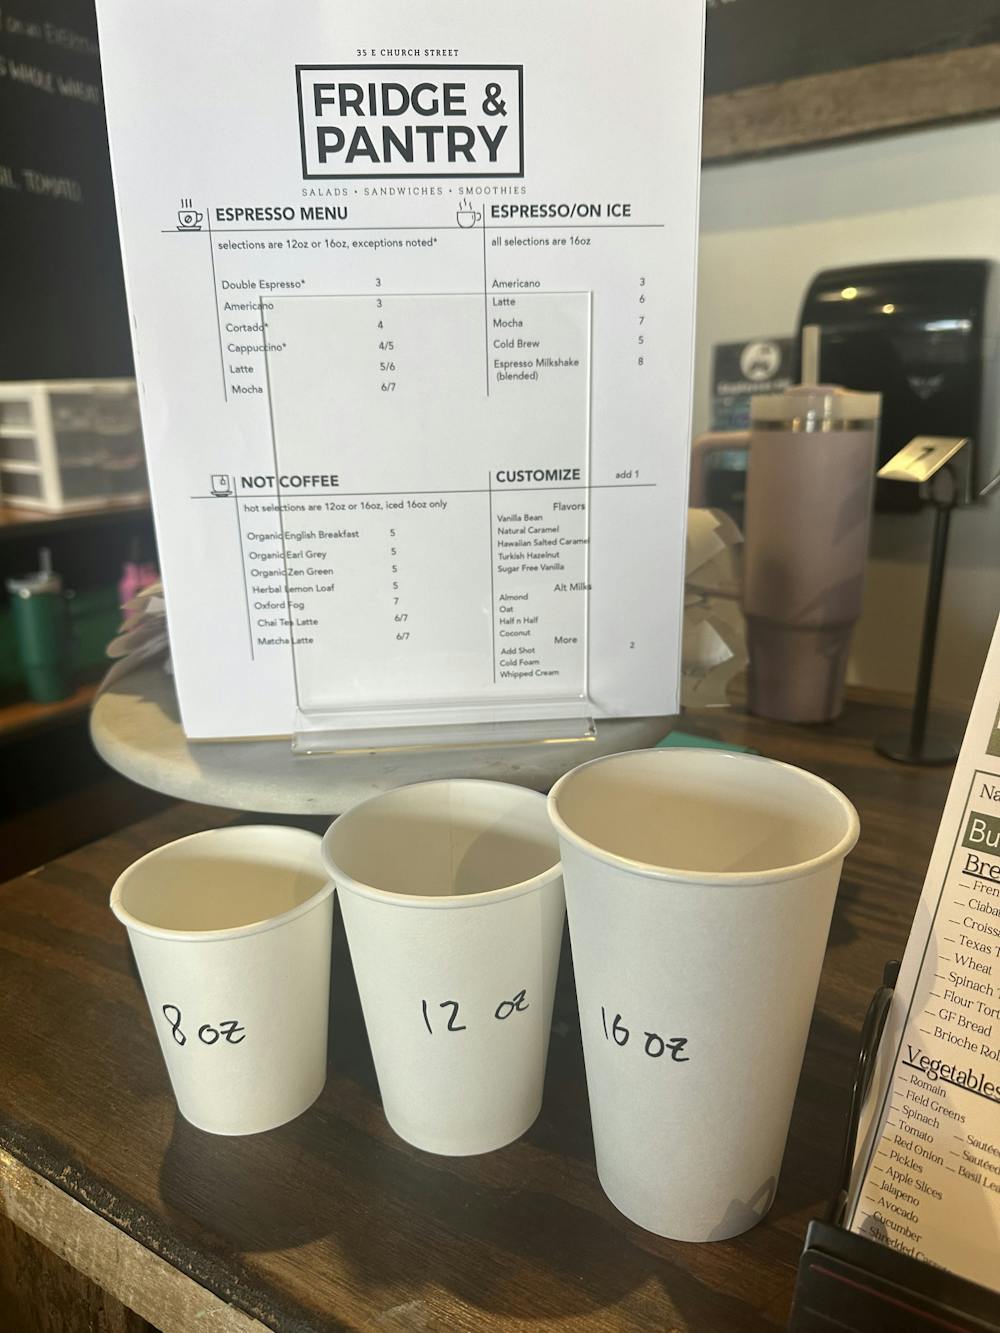 The menu for Fridge’s new espresso bar is featured at the register along with cups for reference to how big the sizes are.